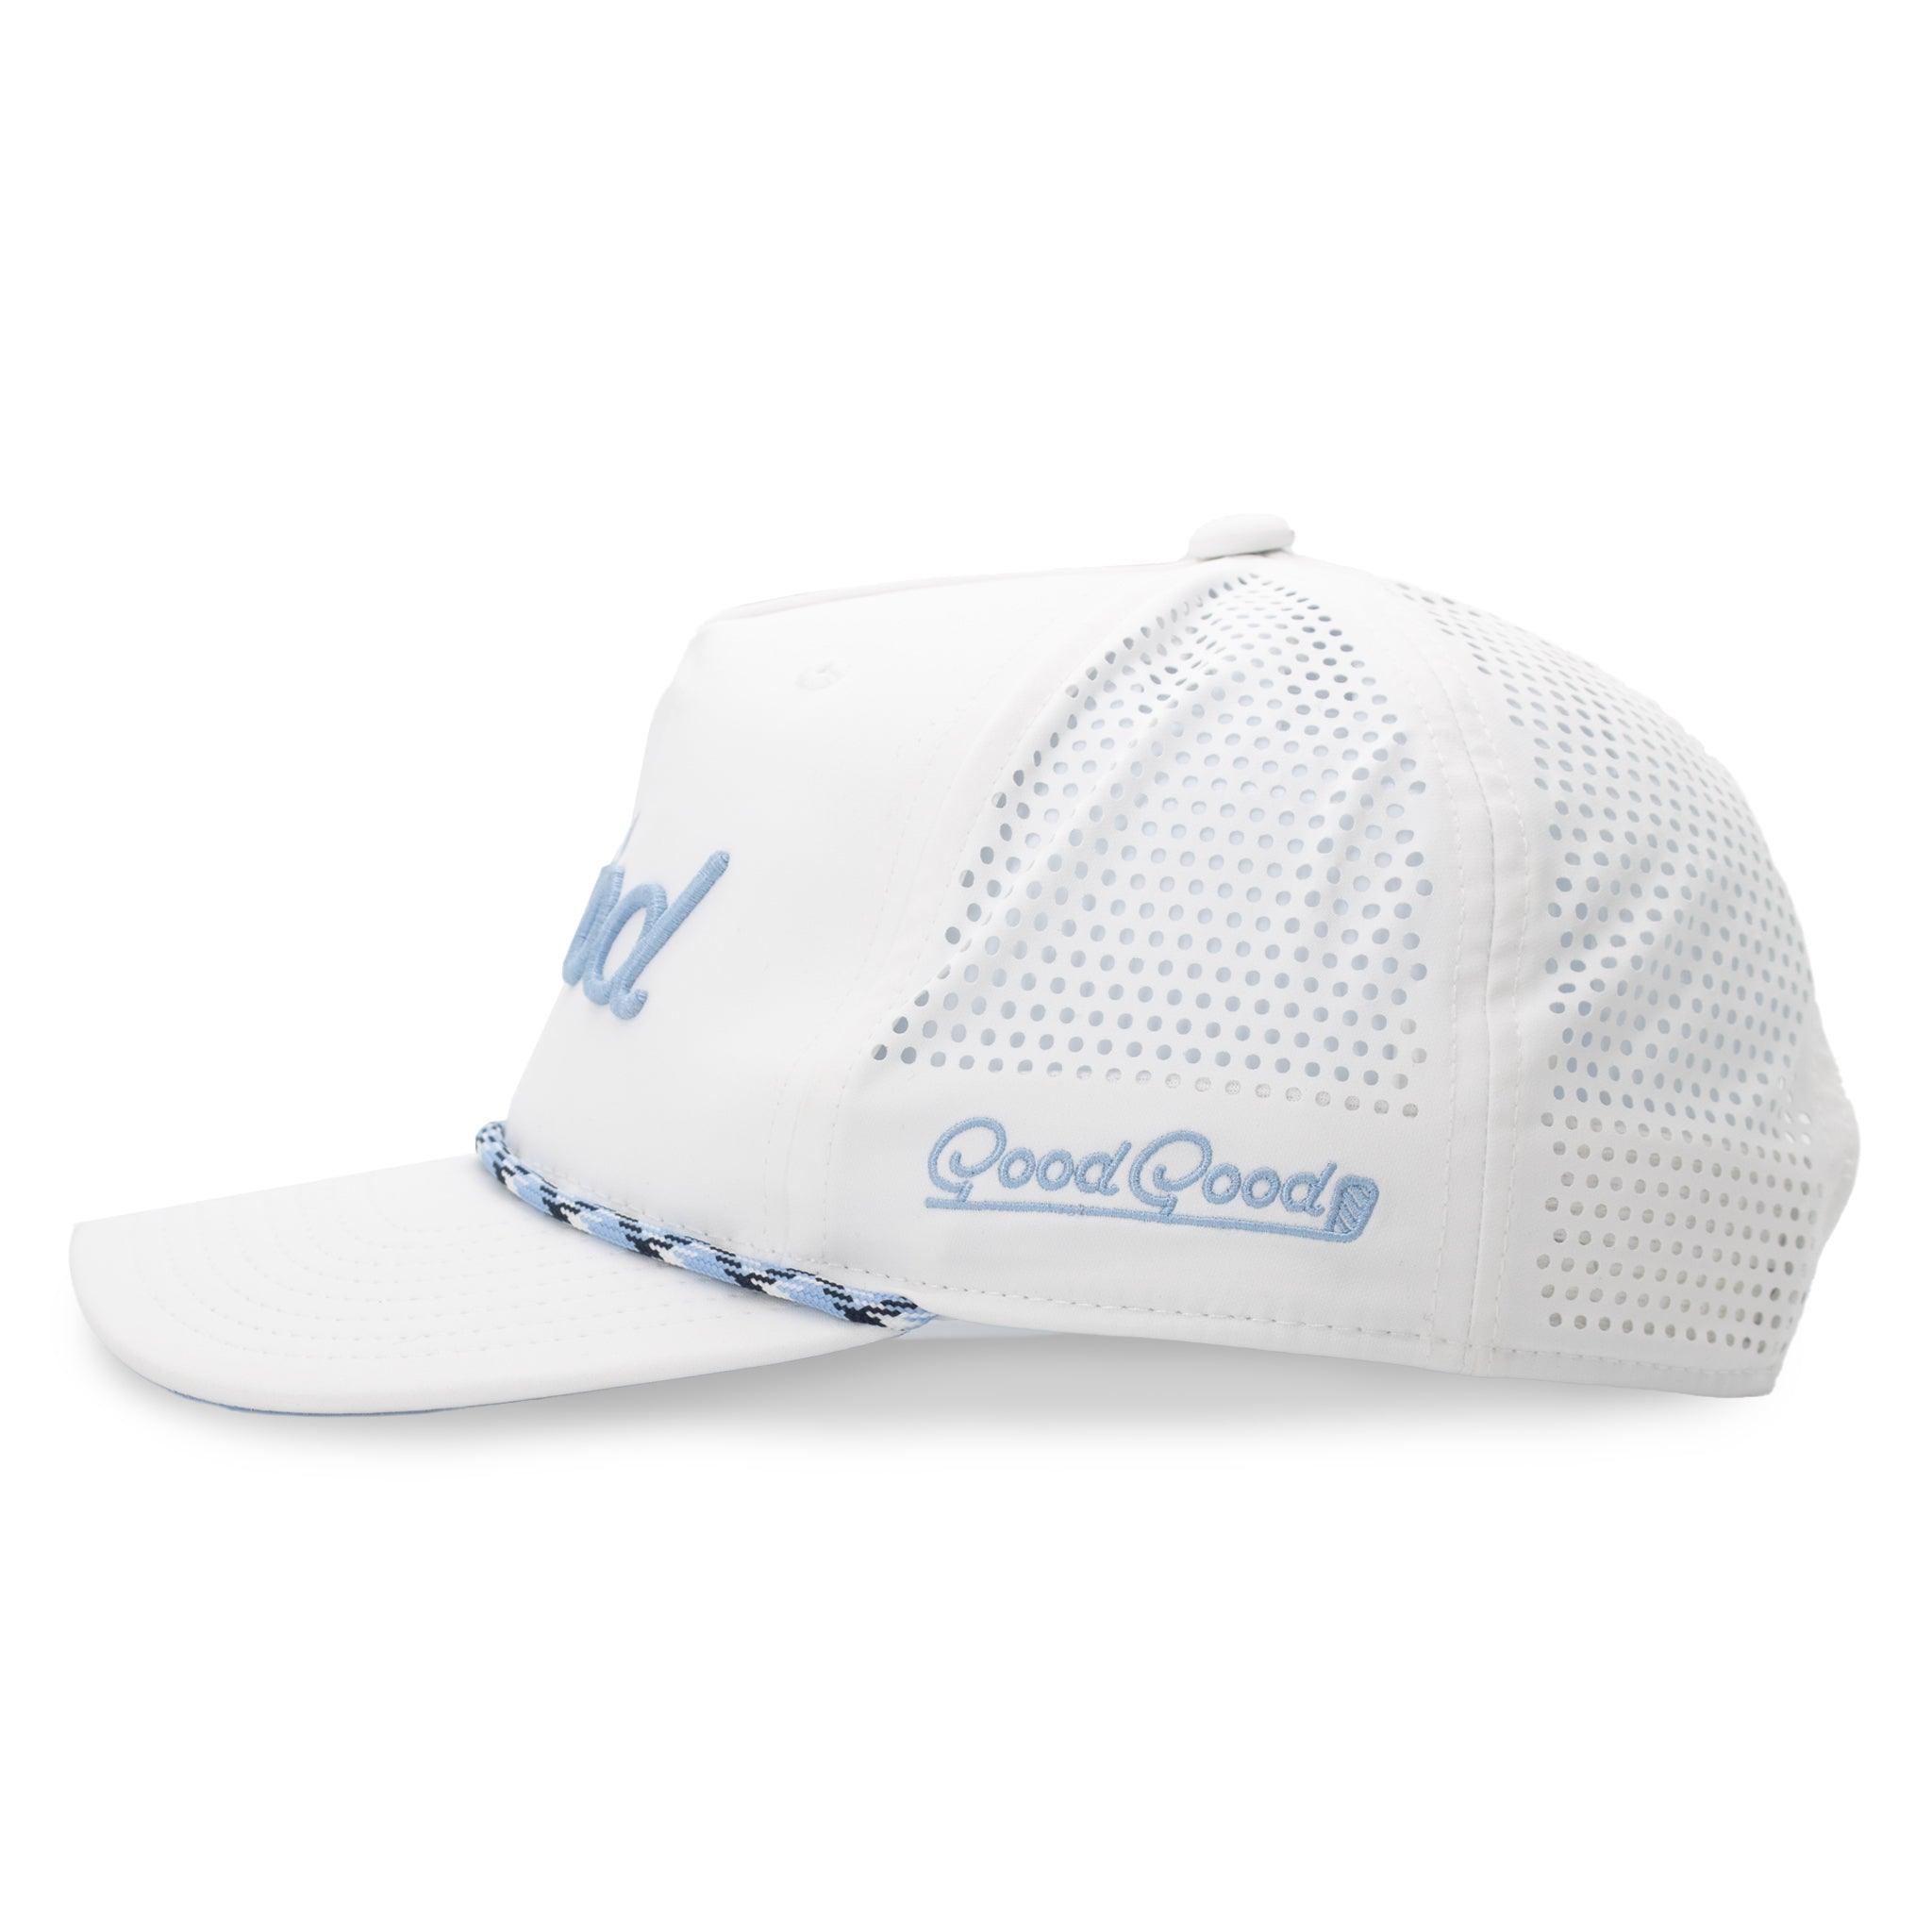 The Goodest Rope Hat - Exclusive Golf Rope Hat